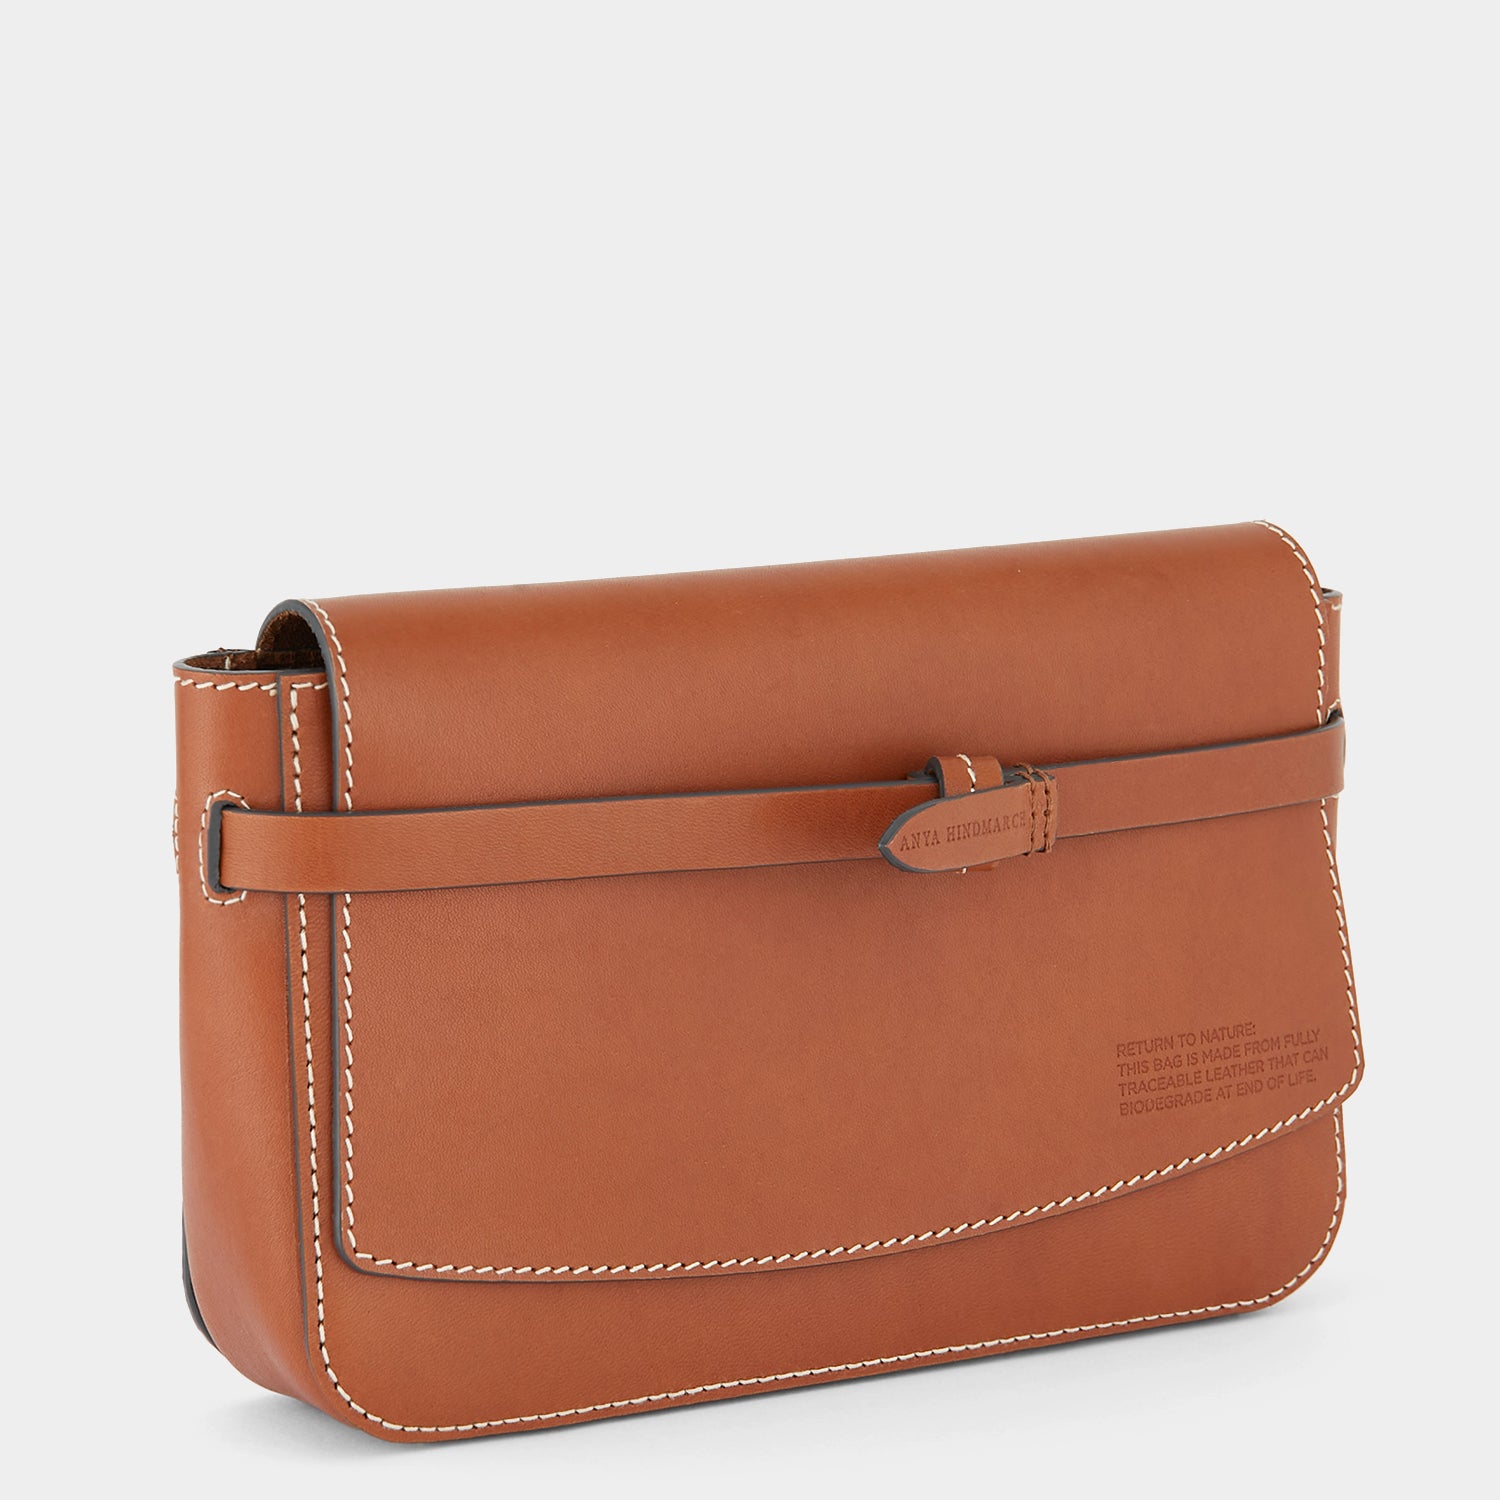 Return to Nature Clutch -

                  
                    Compostable Leather in Tan -
                  

                  Anya Hindmarch UK
